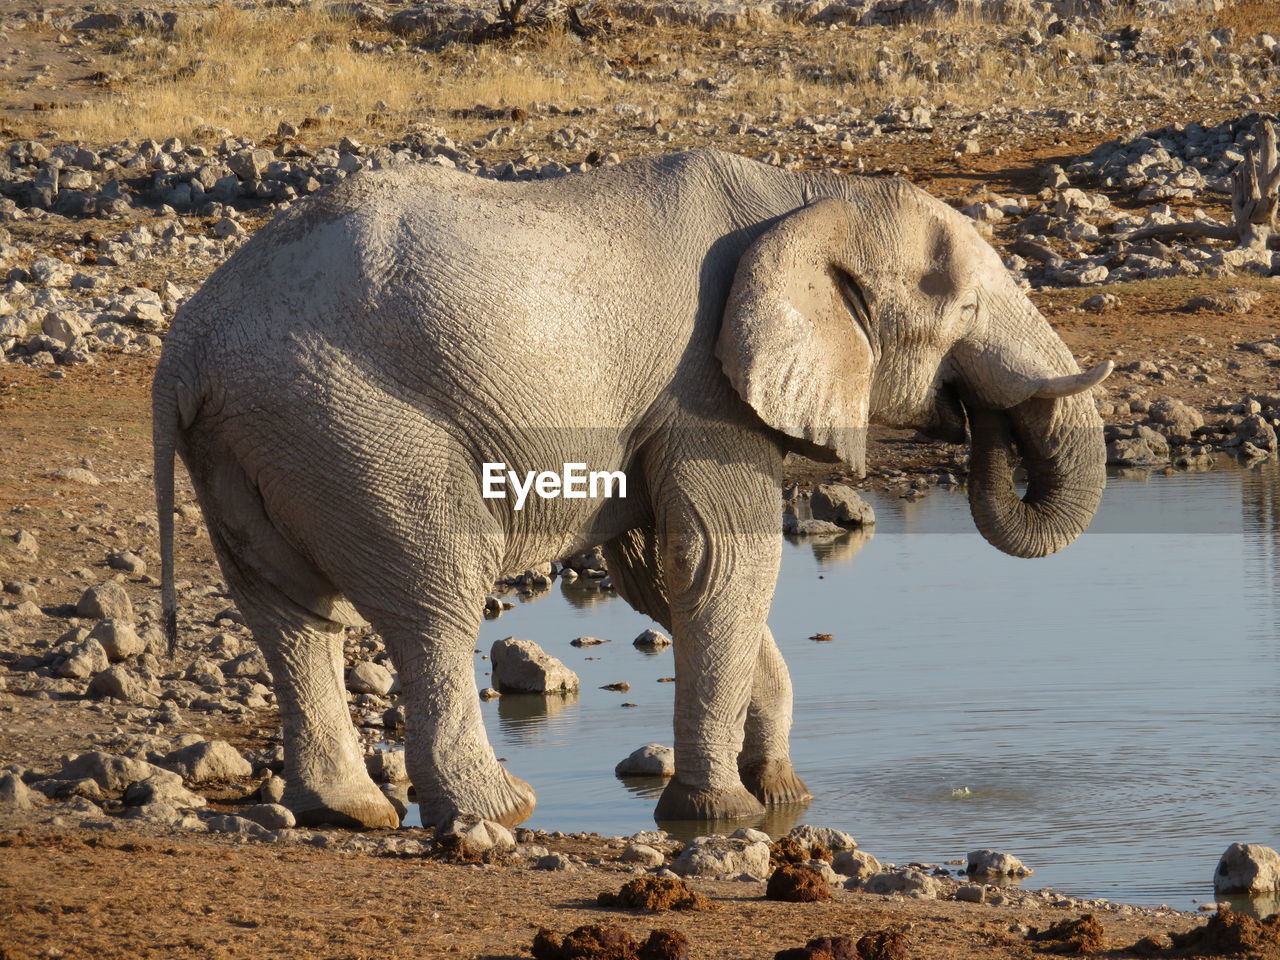 VIEW OF ELEPHANT DRINKING WATER FROM BEACH